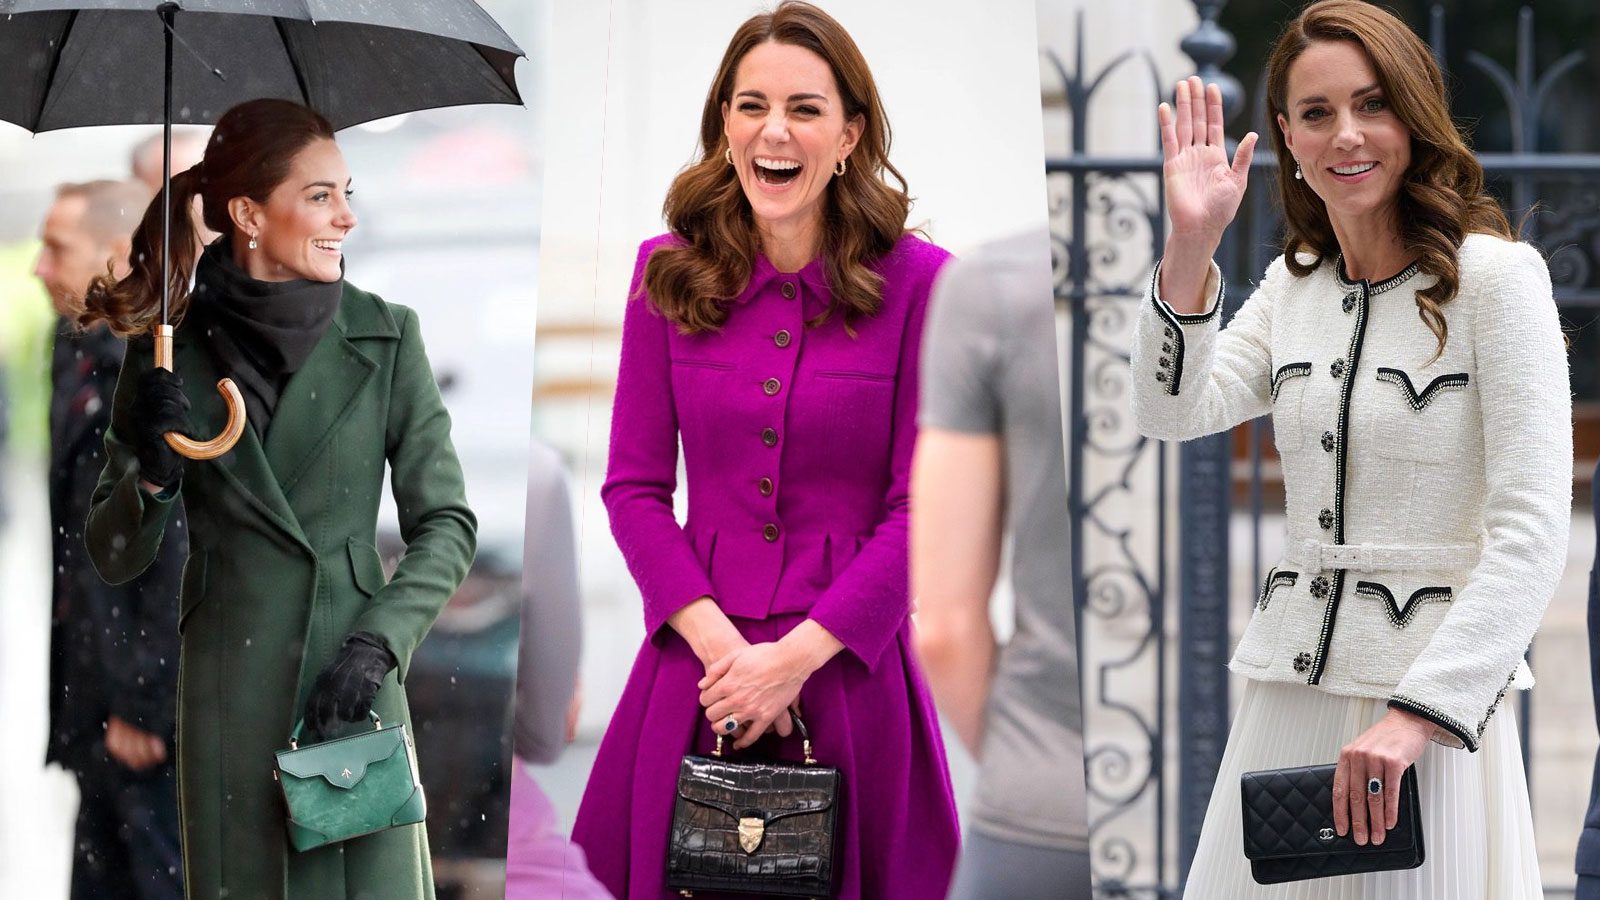 Kate Middleton Let a Tiny Baby Hold Her Purse